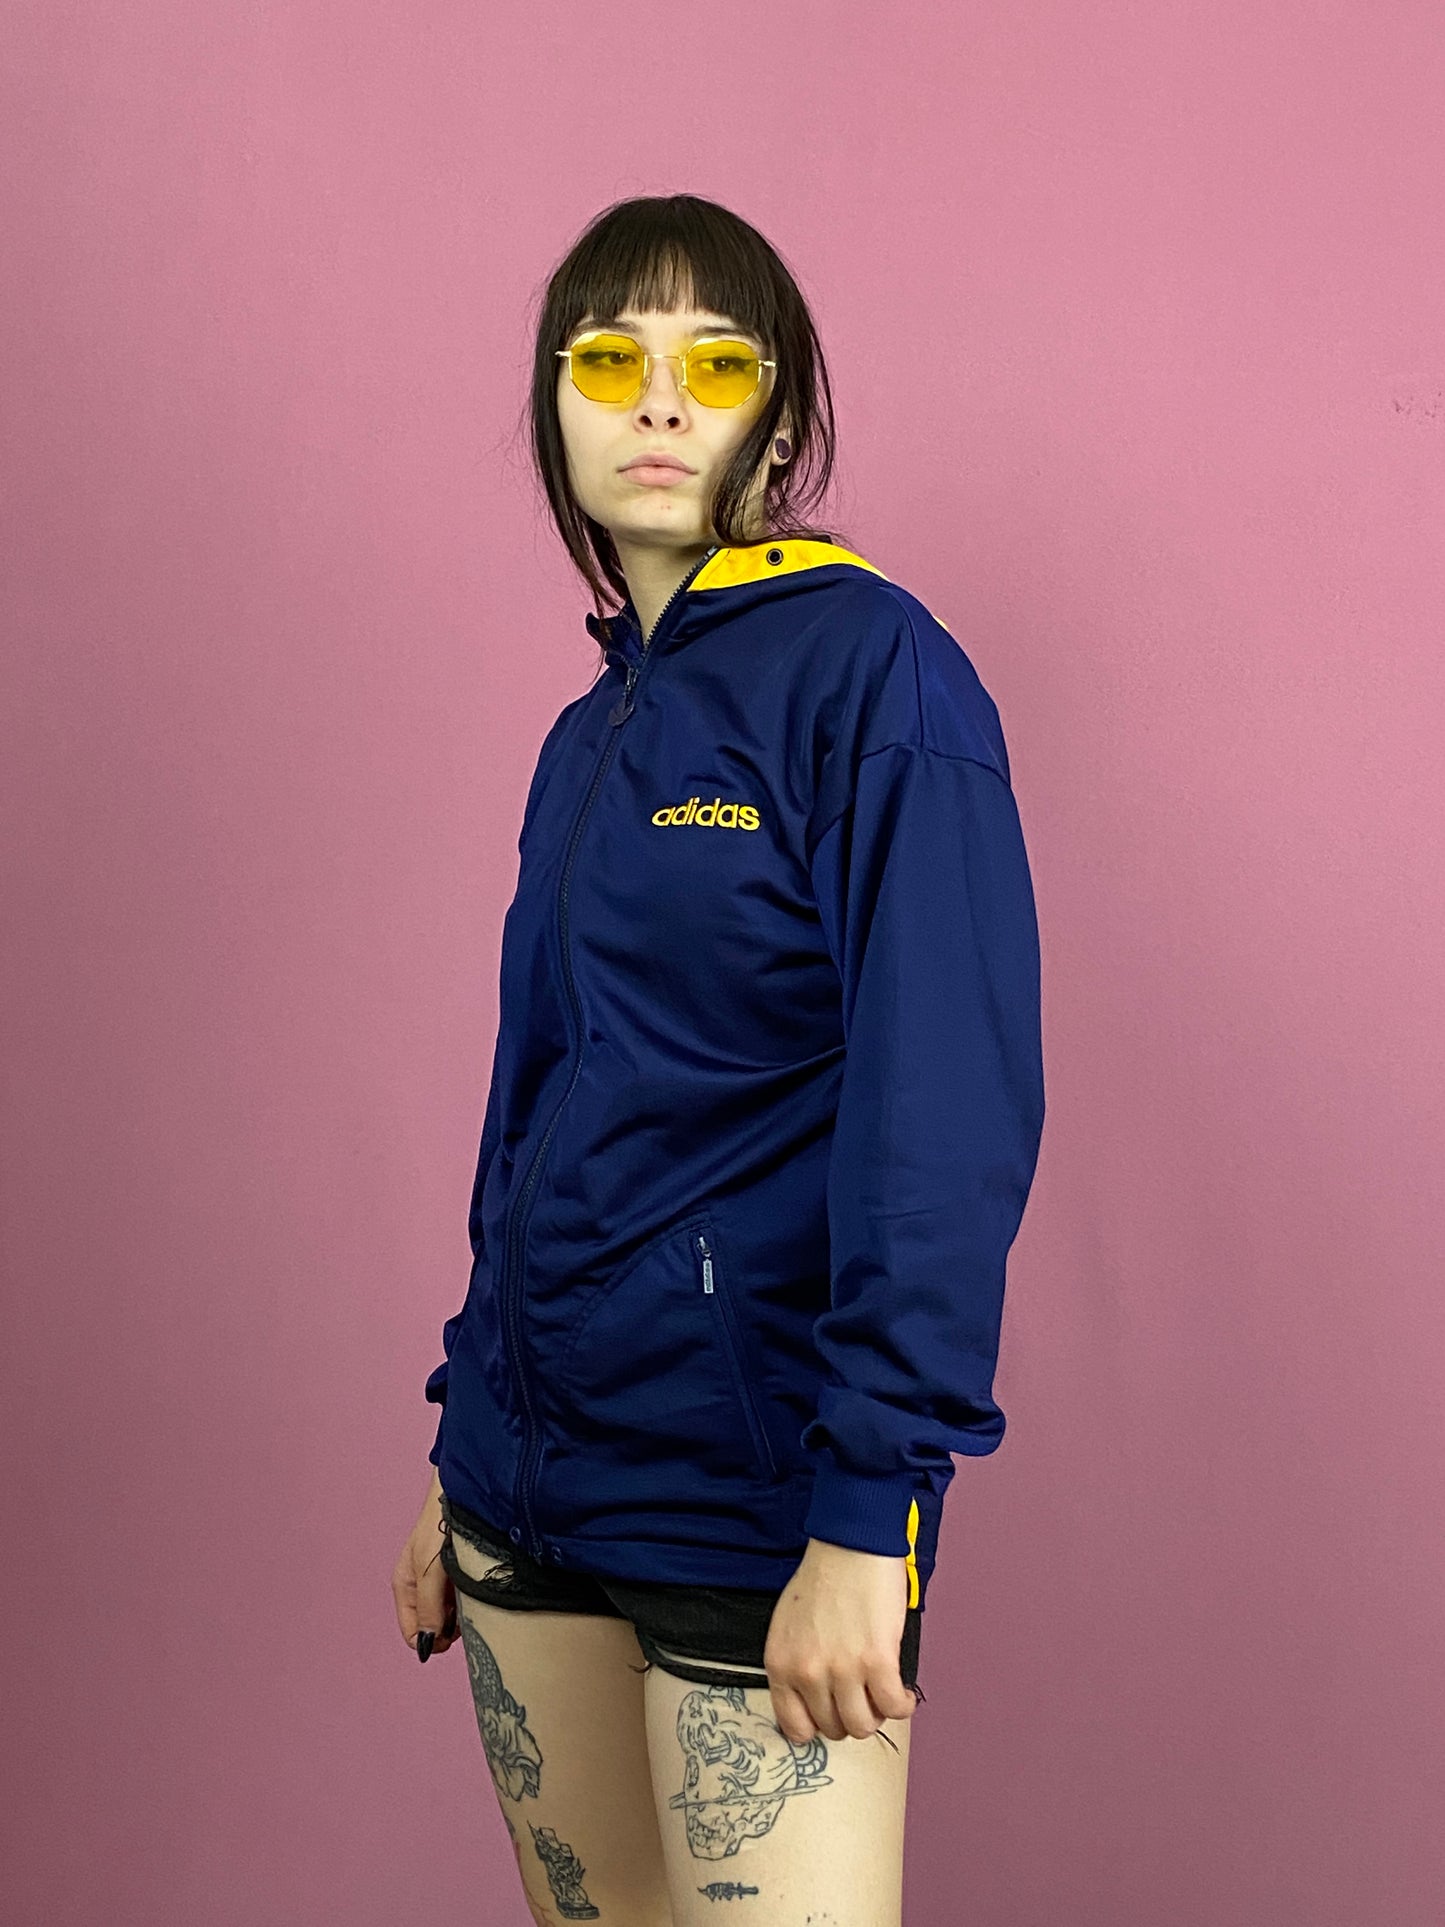 90s Adidas Vintage Women's Hooded Track Jacket - Small Navy Blue Polyester